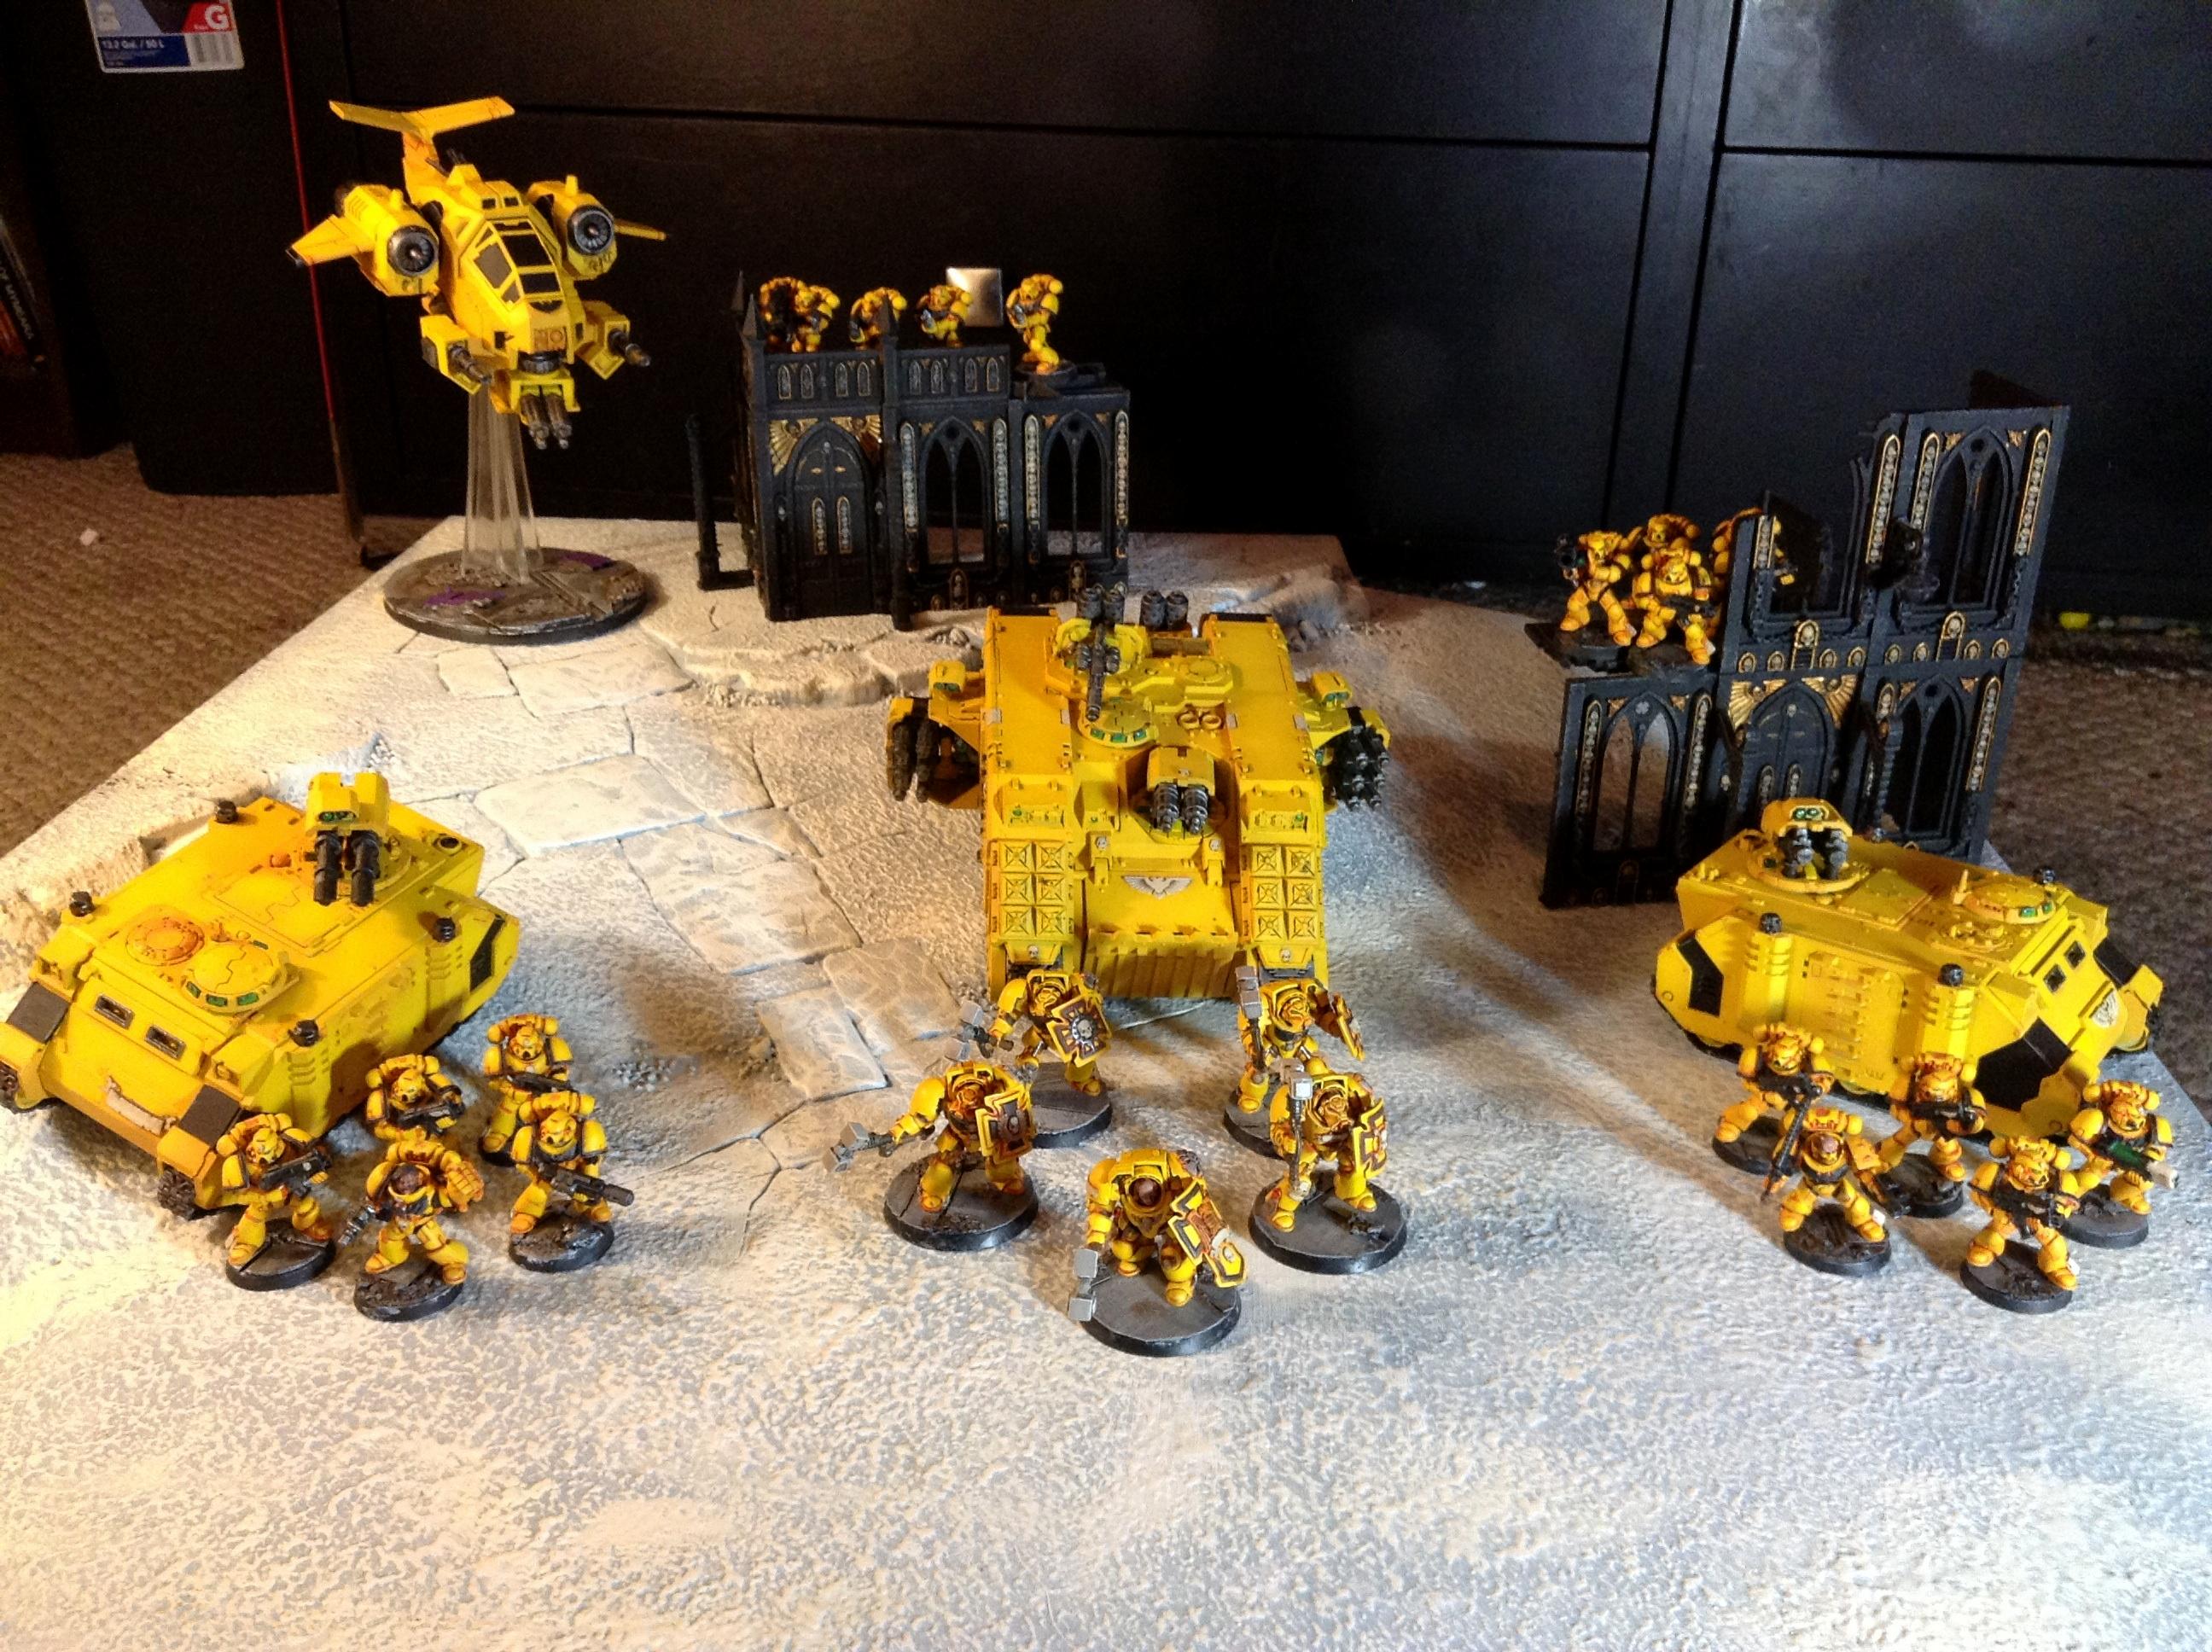 Imperial Fists Army